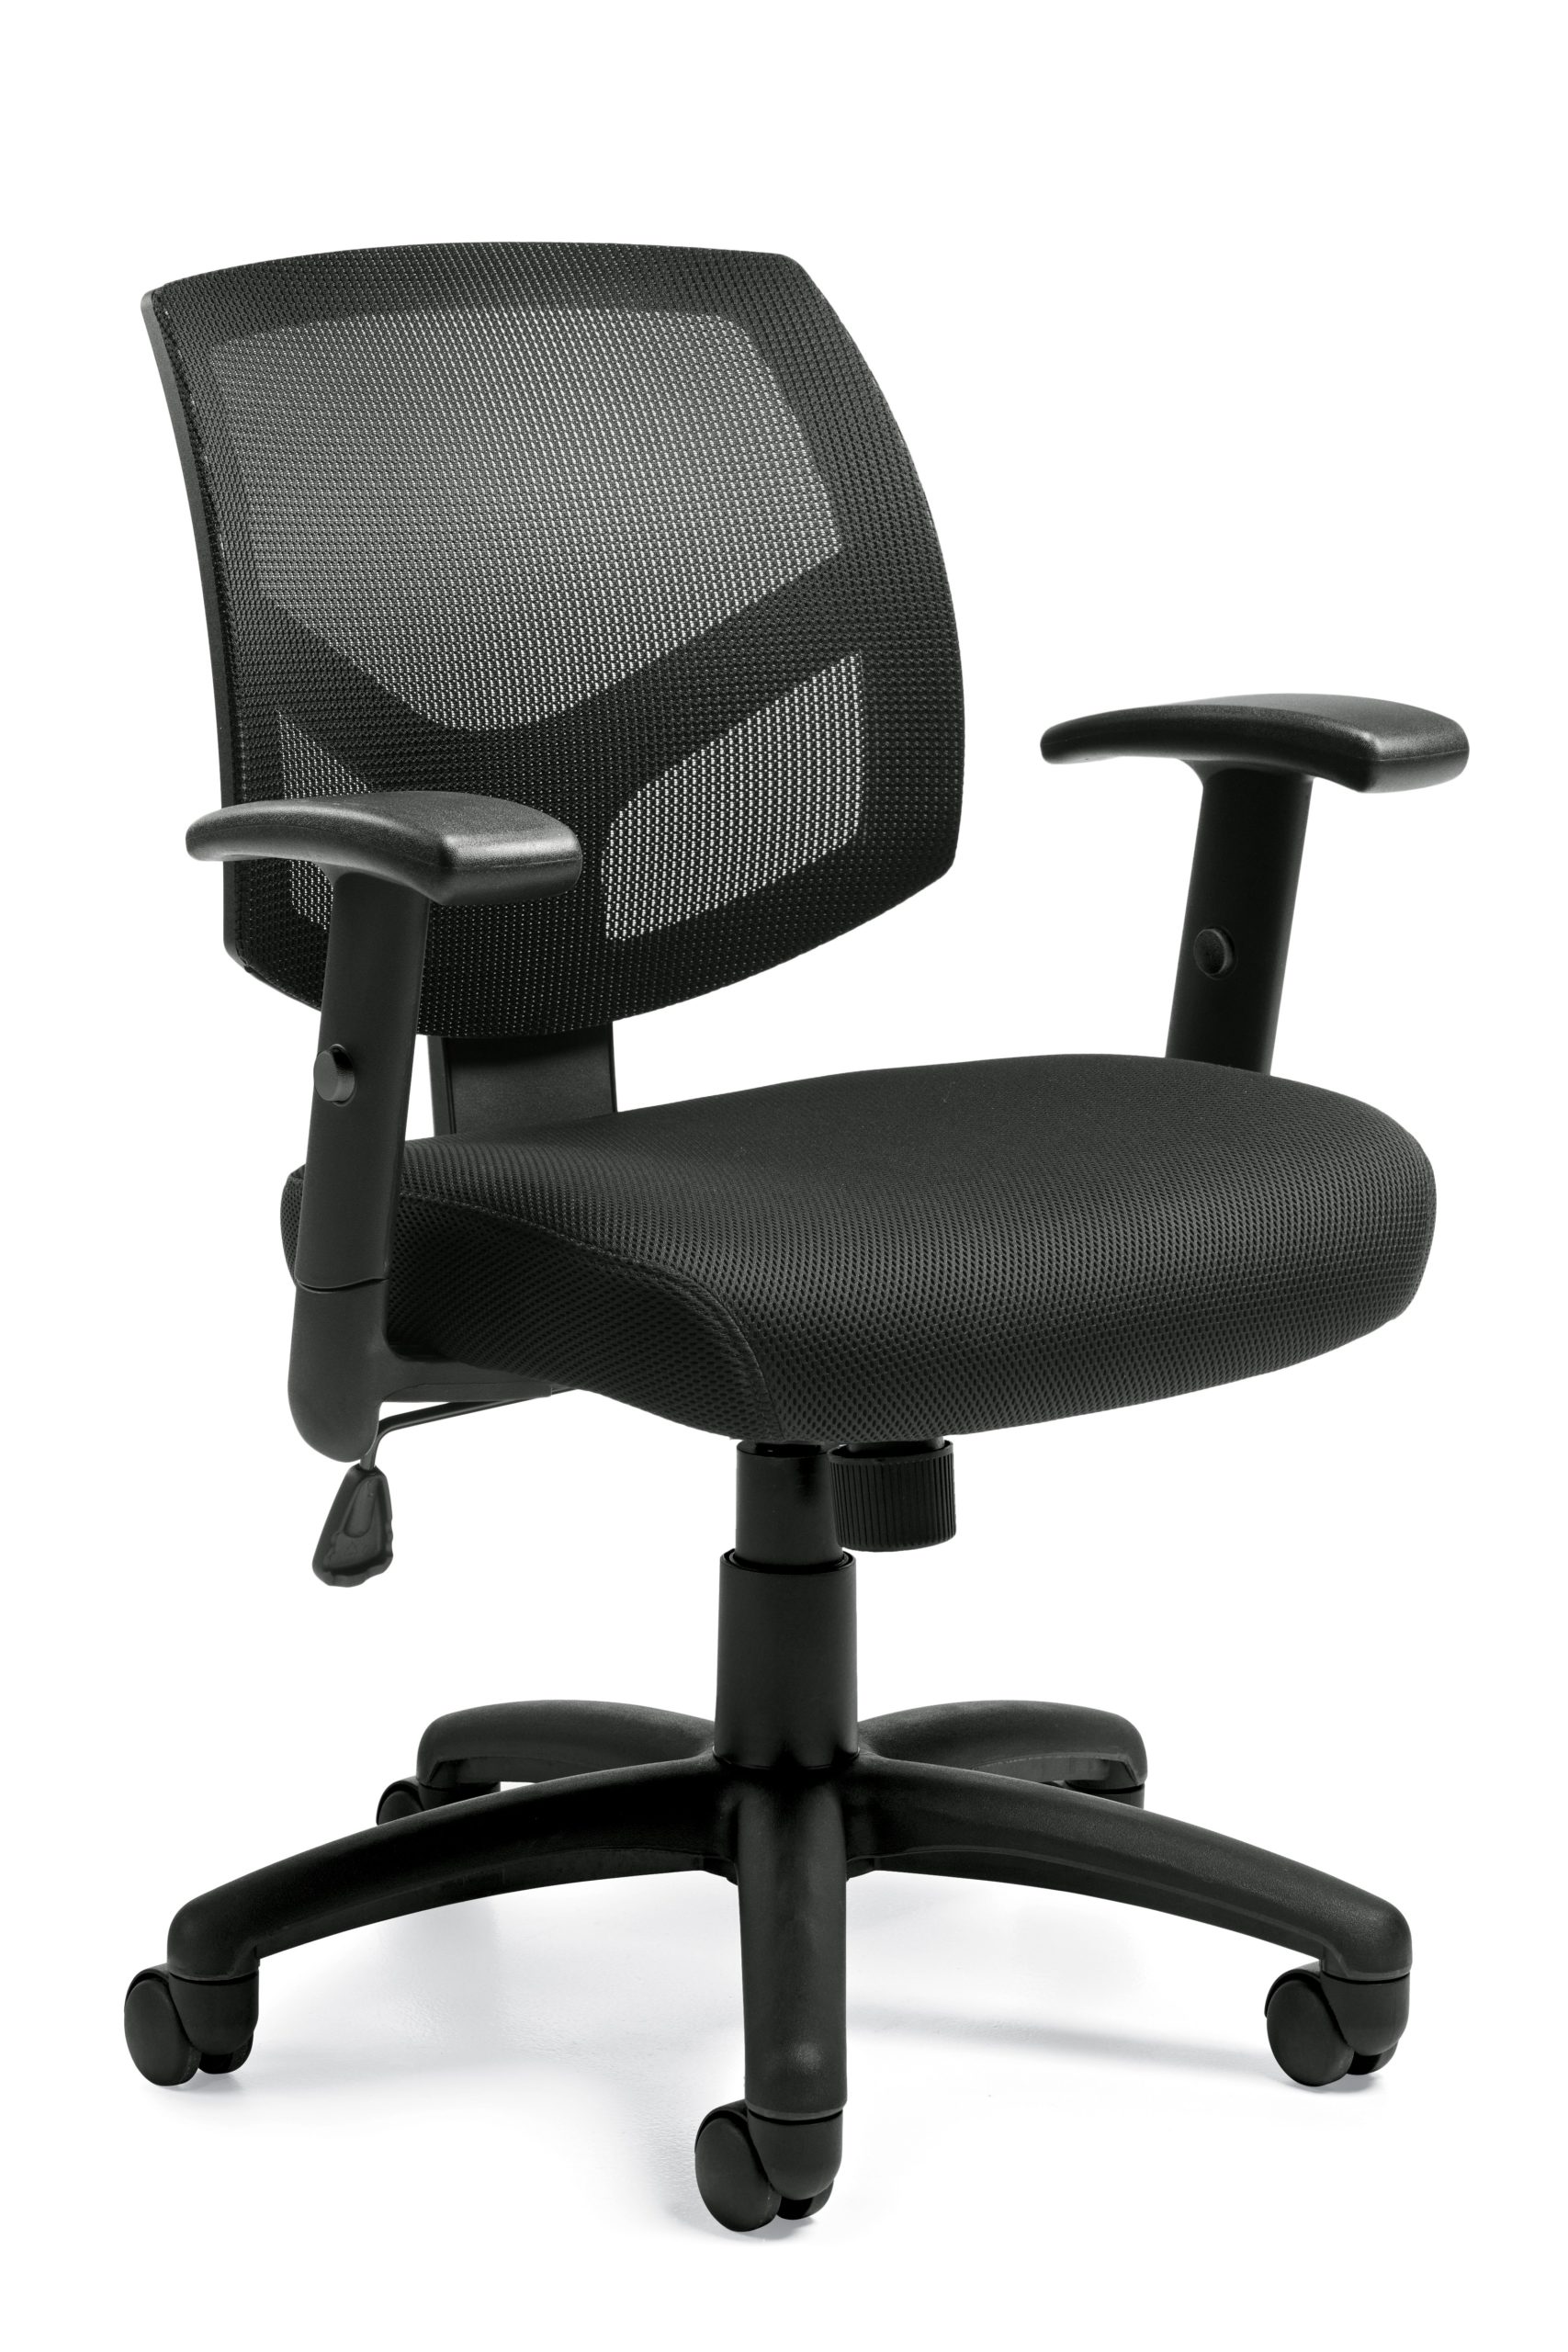 Basic low back administrative swivel-tilt chair with black fabric seat and black mesh back, 5-star base, and height-adjustable arms.